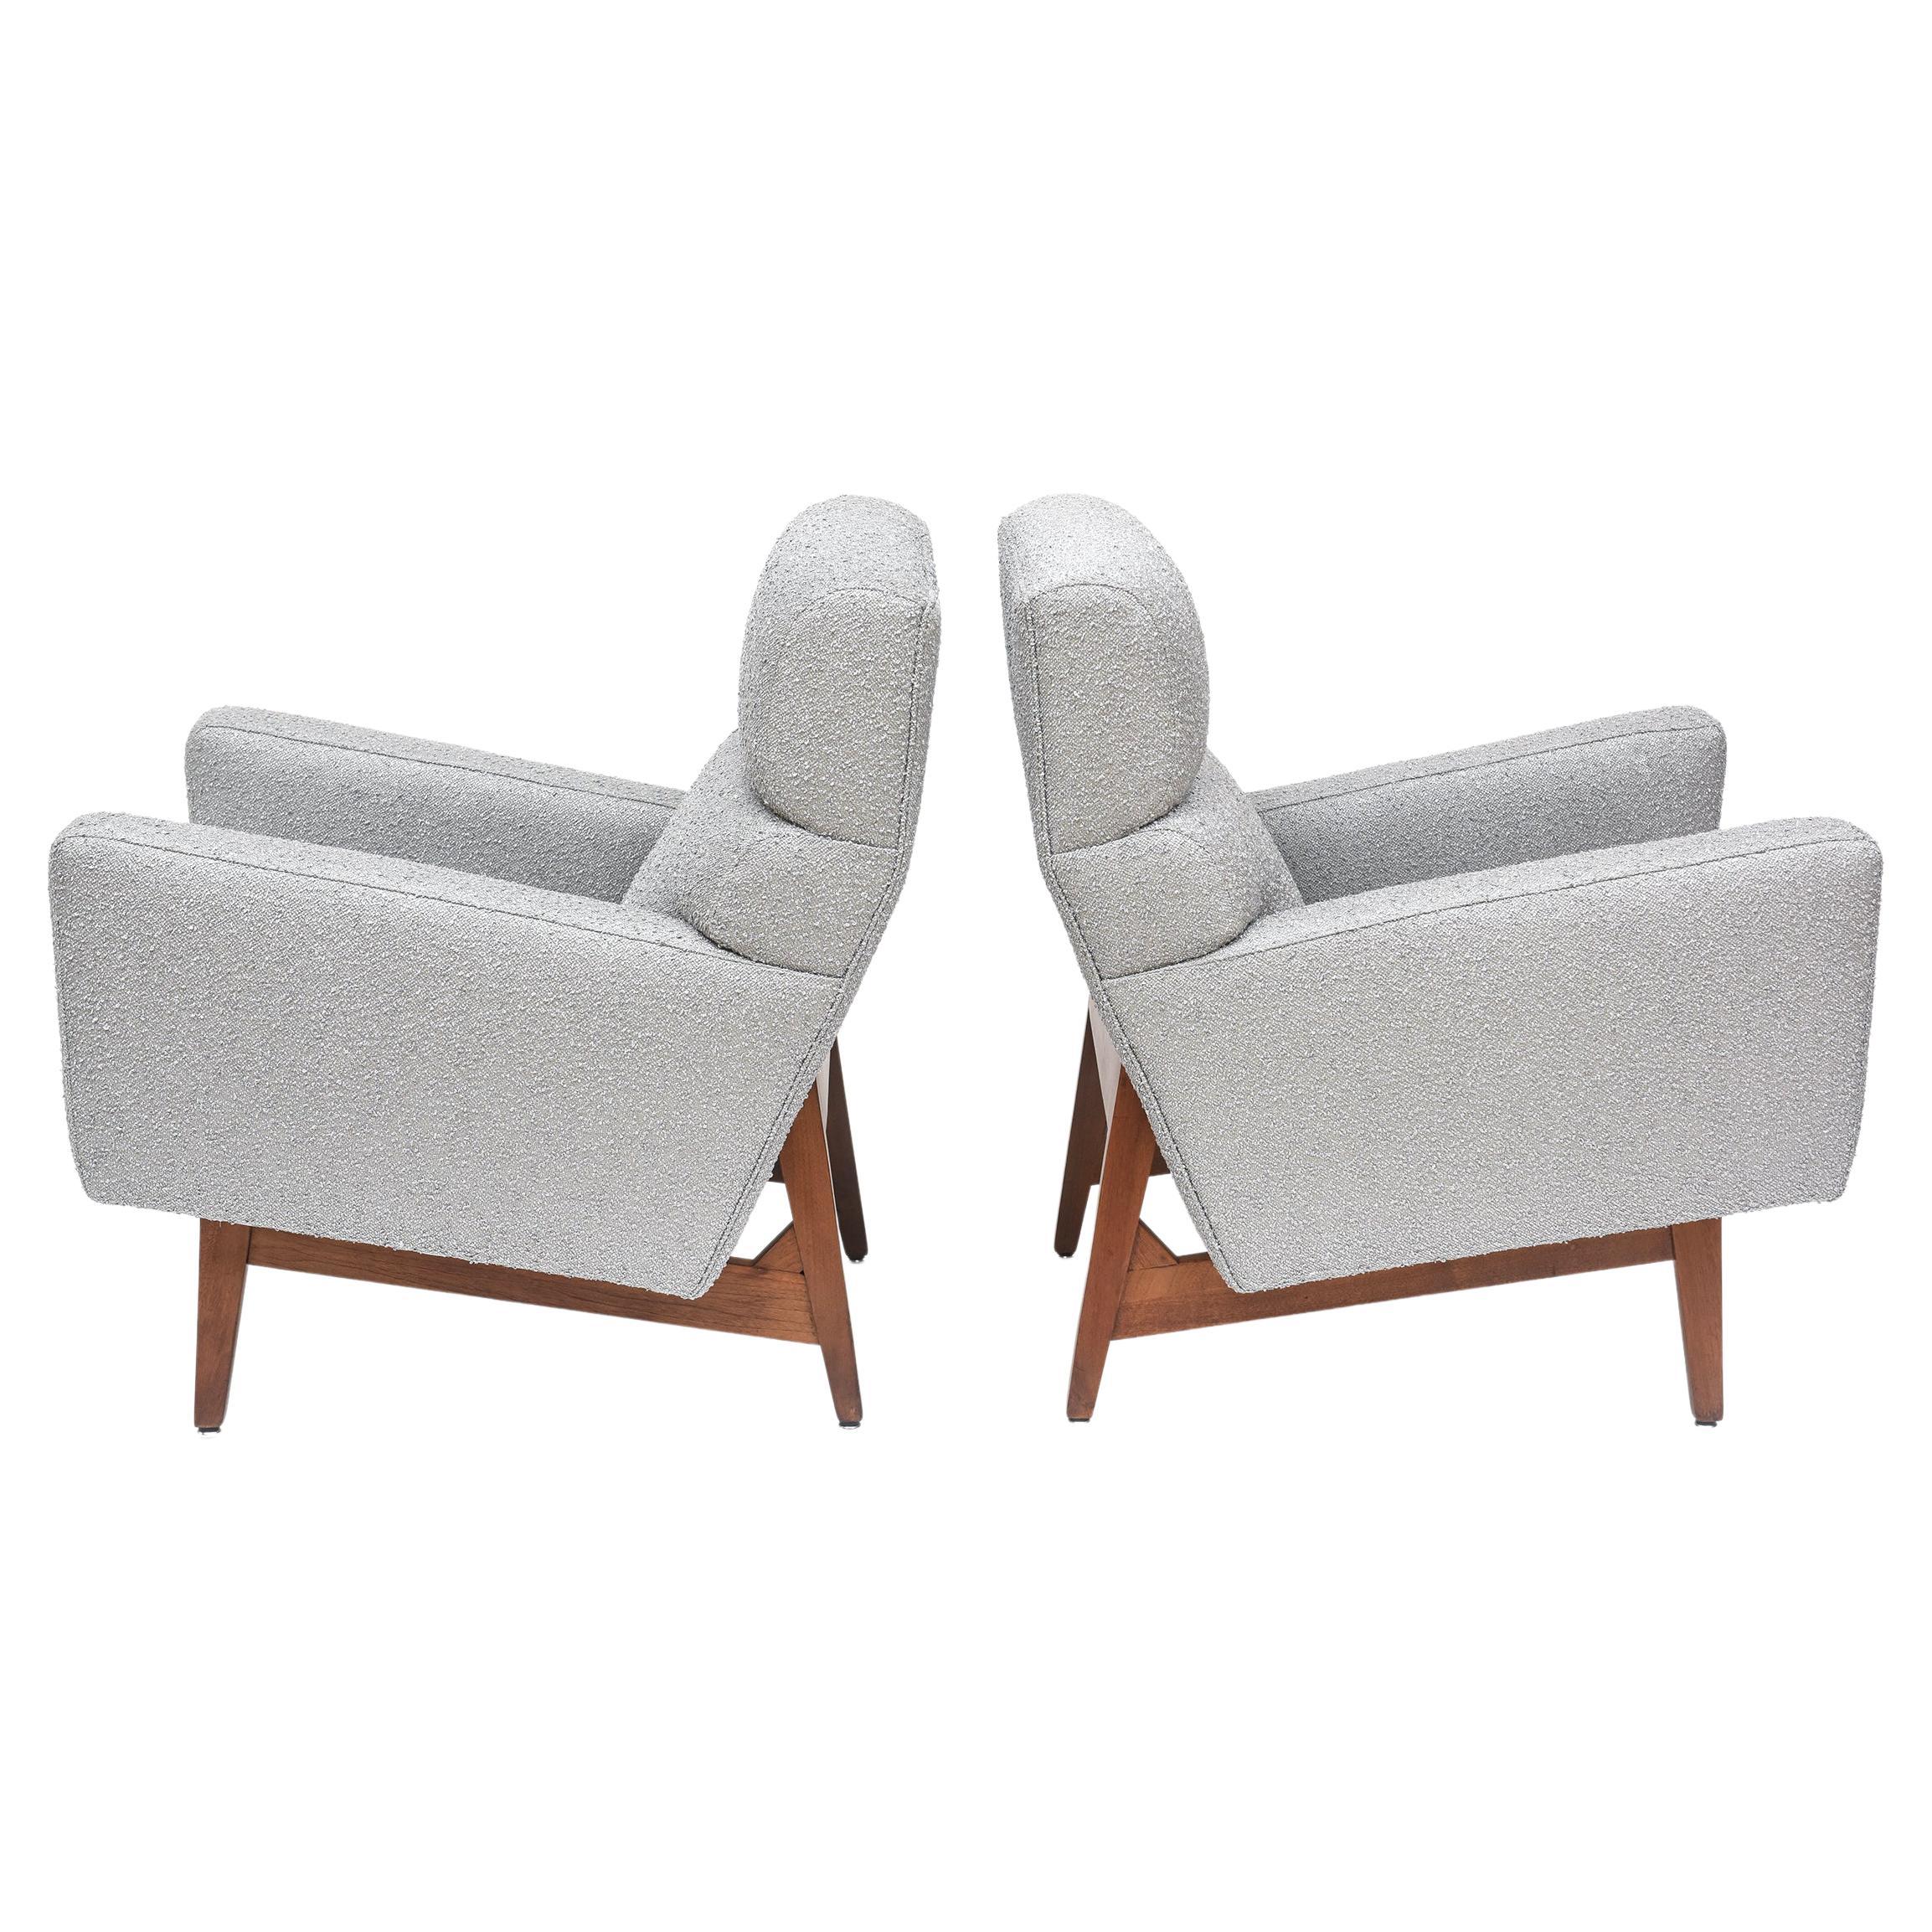 Pair of Jens Risom Lounge Chairs For Sale